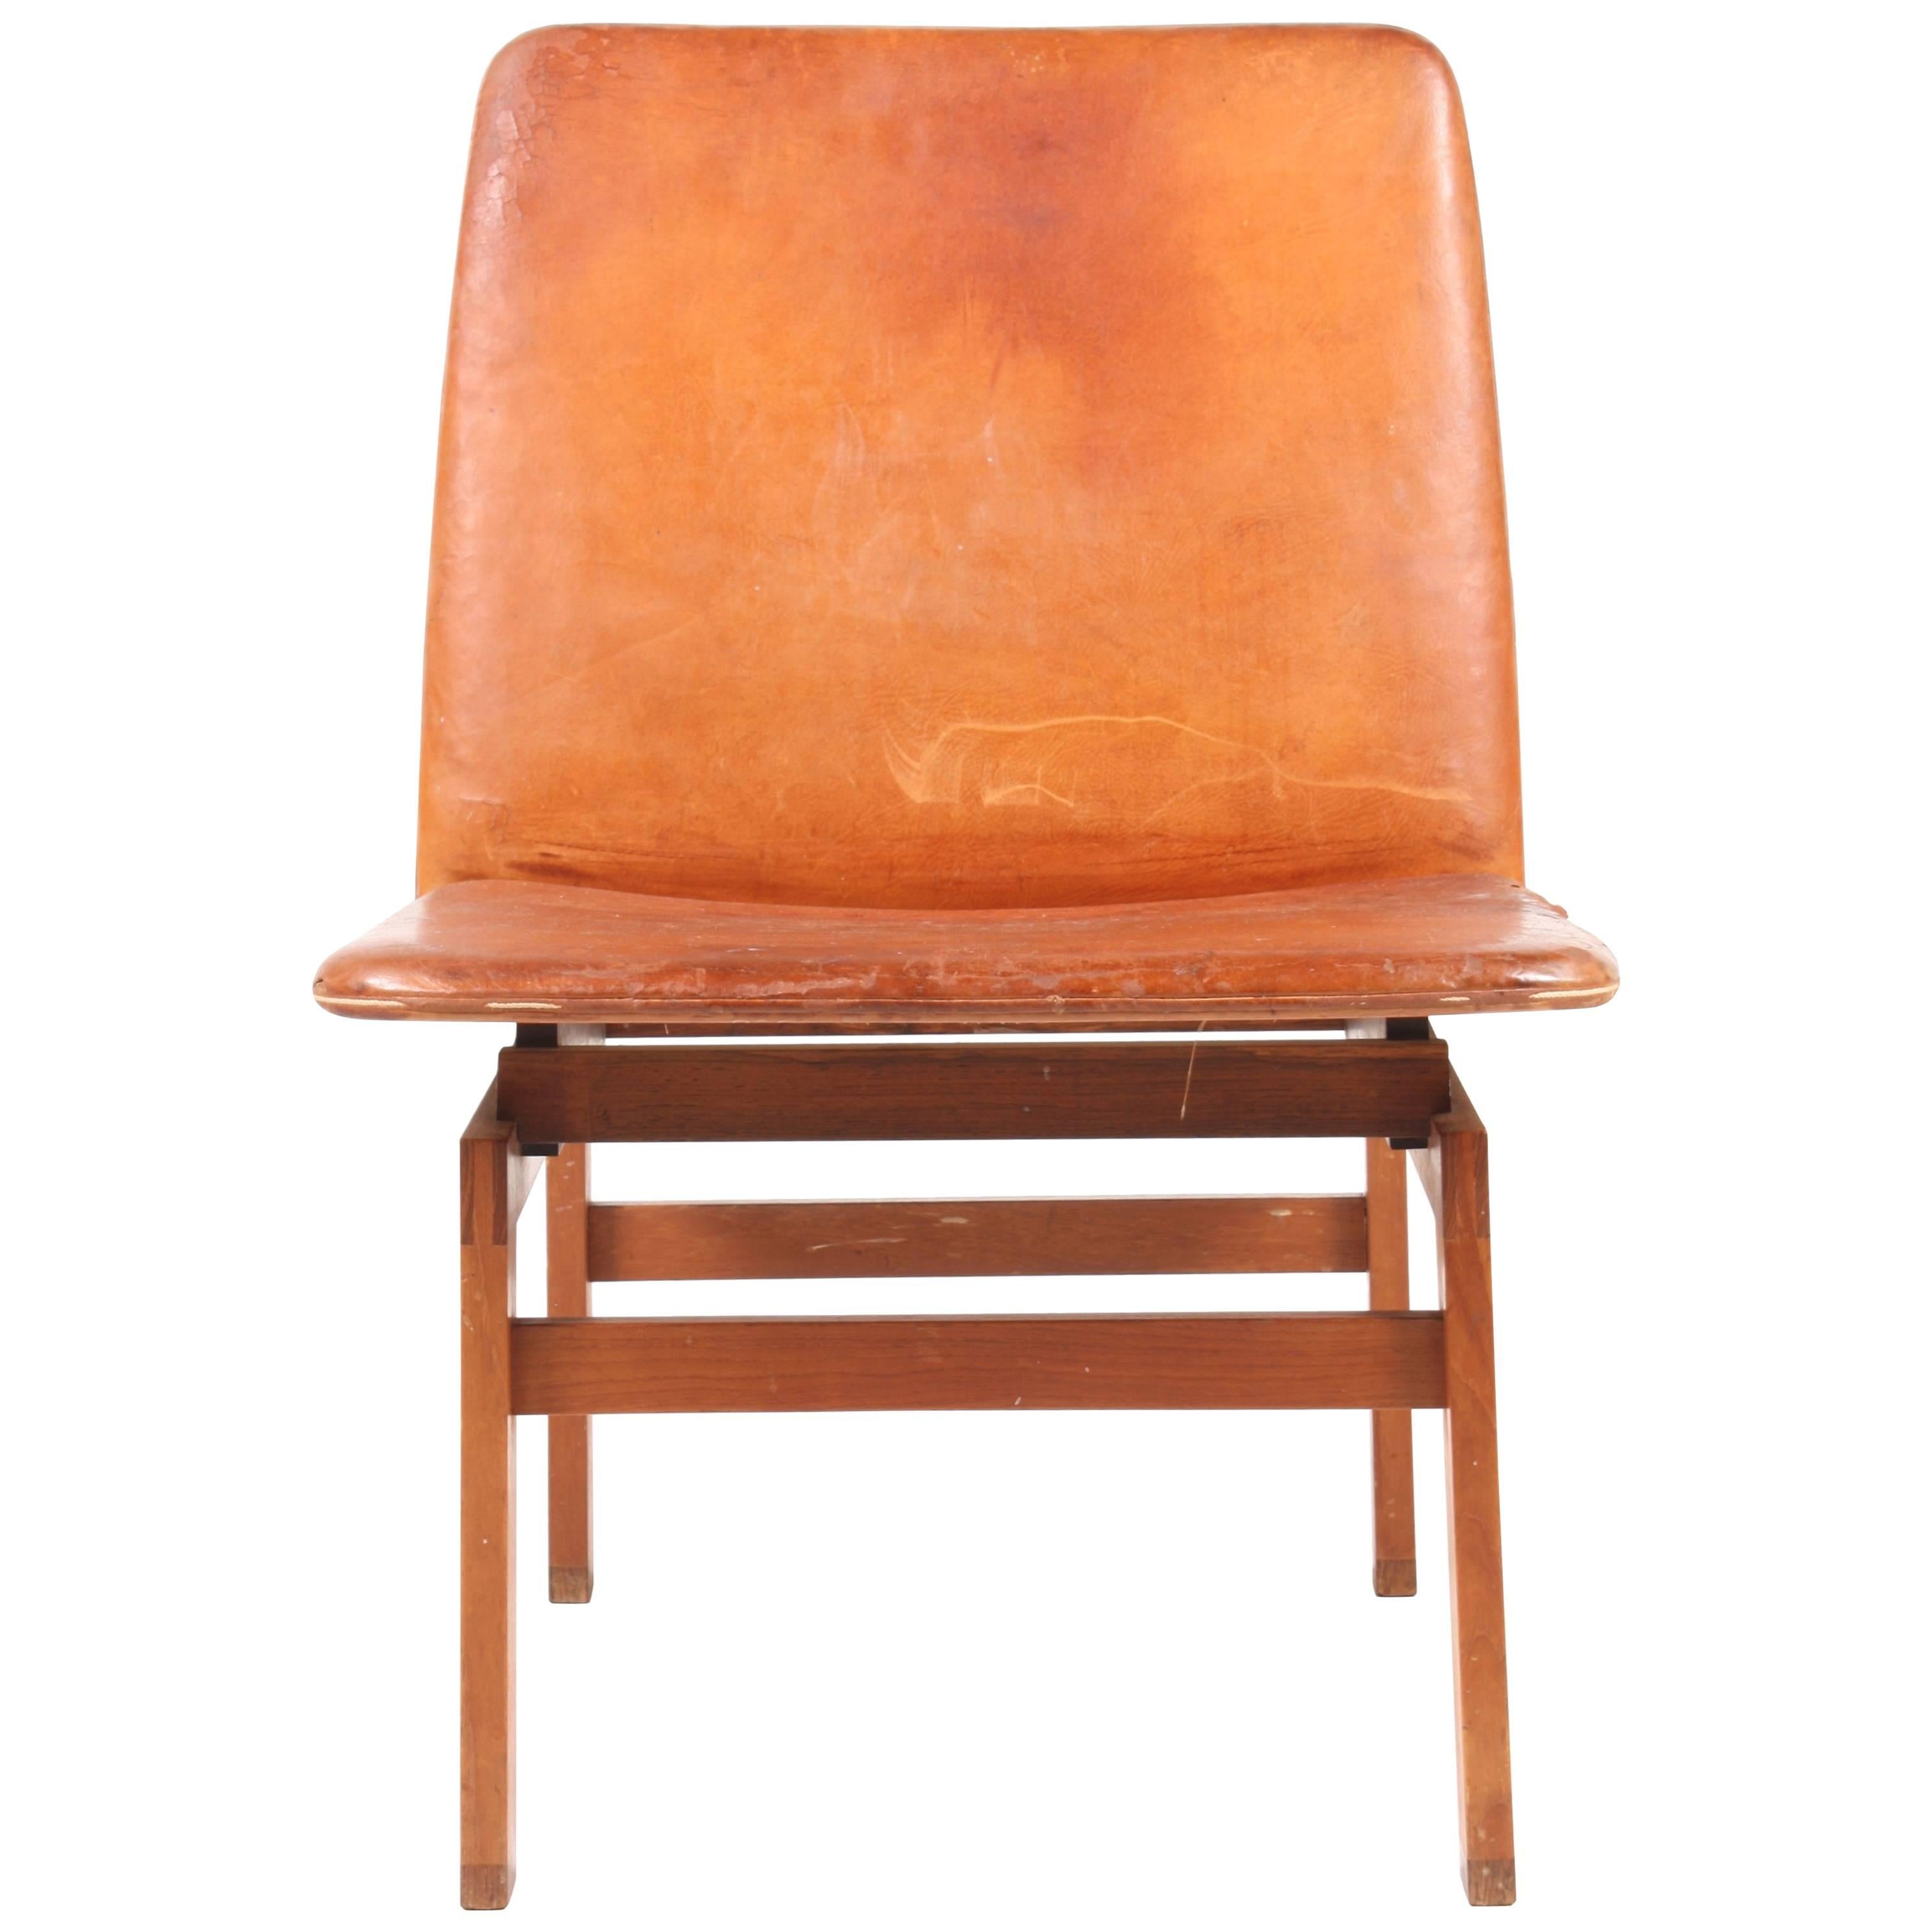 Great Looking Chair in Patinated Leather